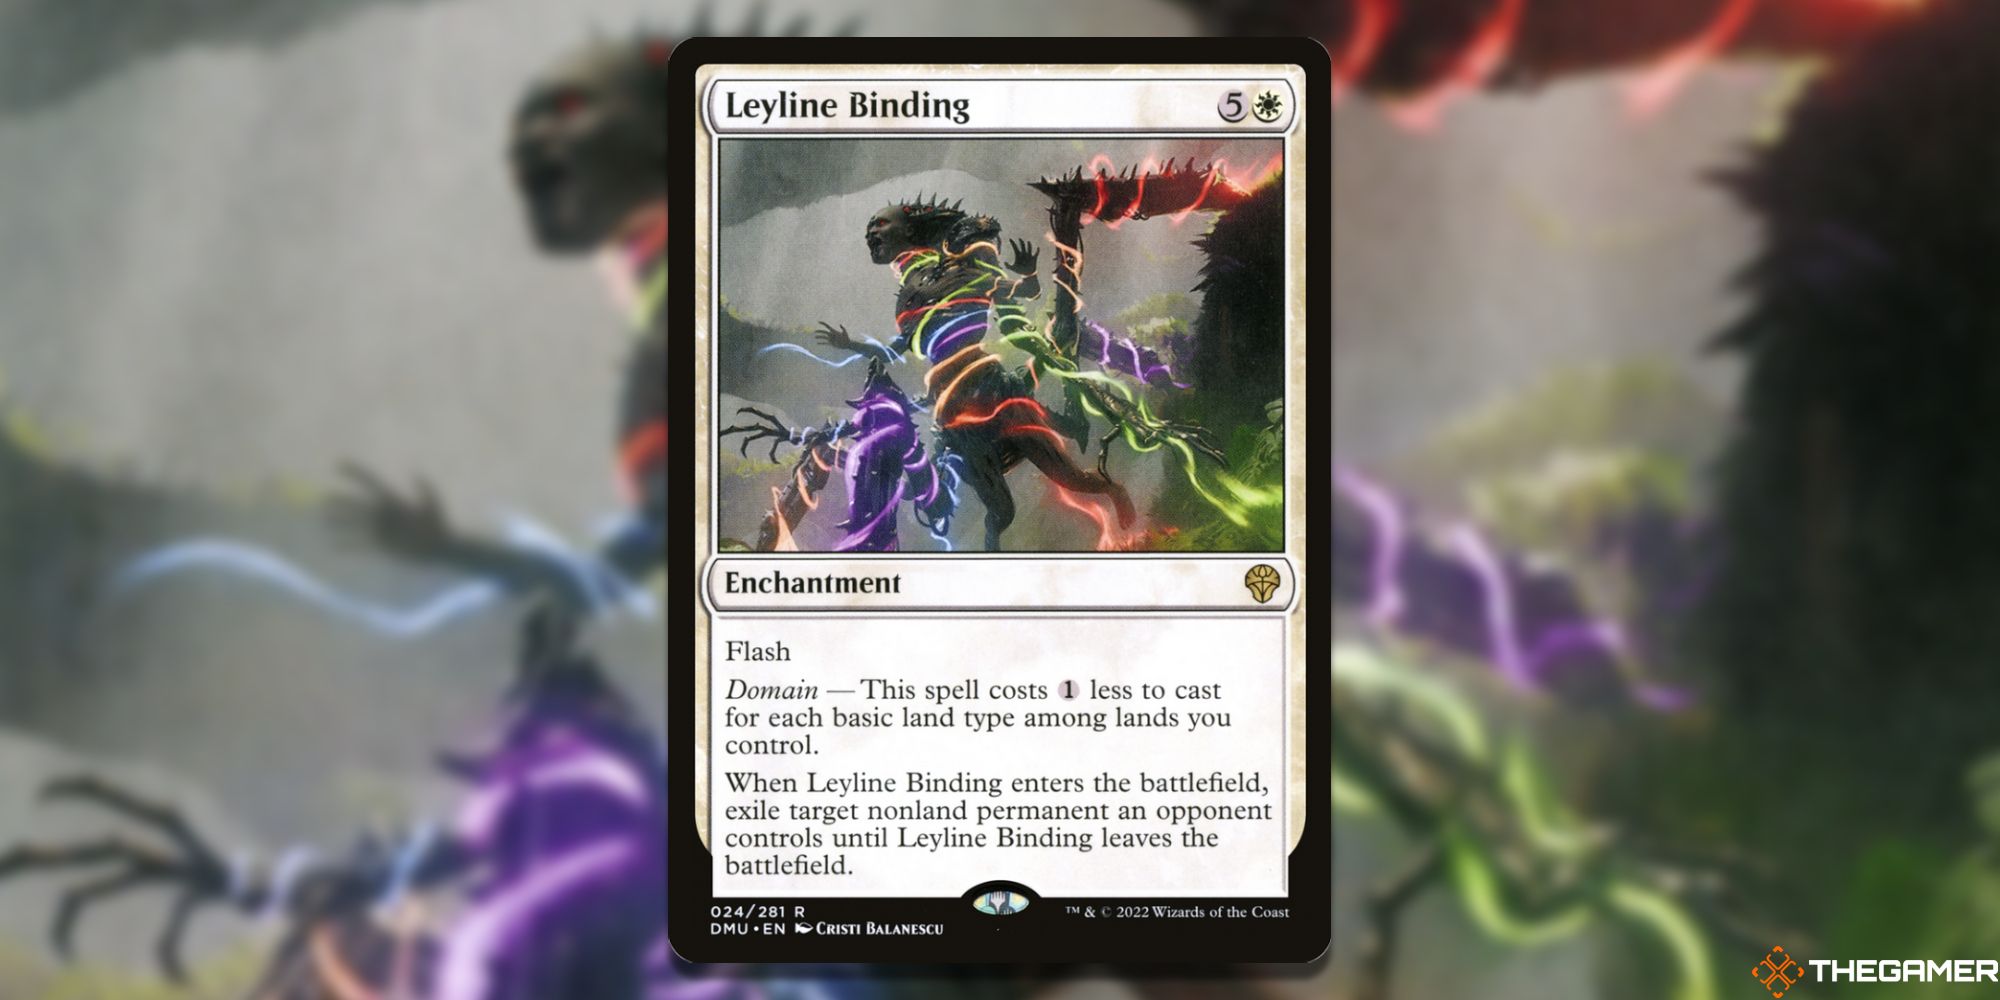 Image of the Leyline Binding card in Magic: The Gathering, with art by Christi Balanescu